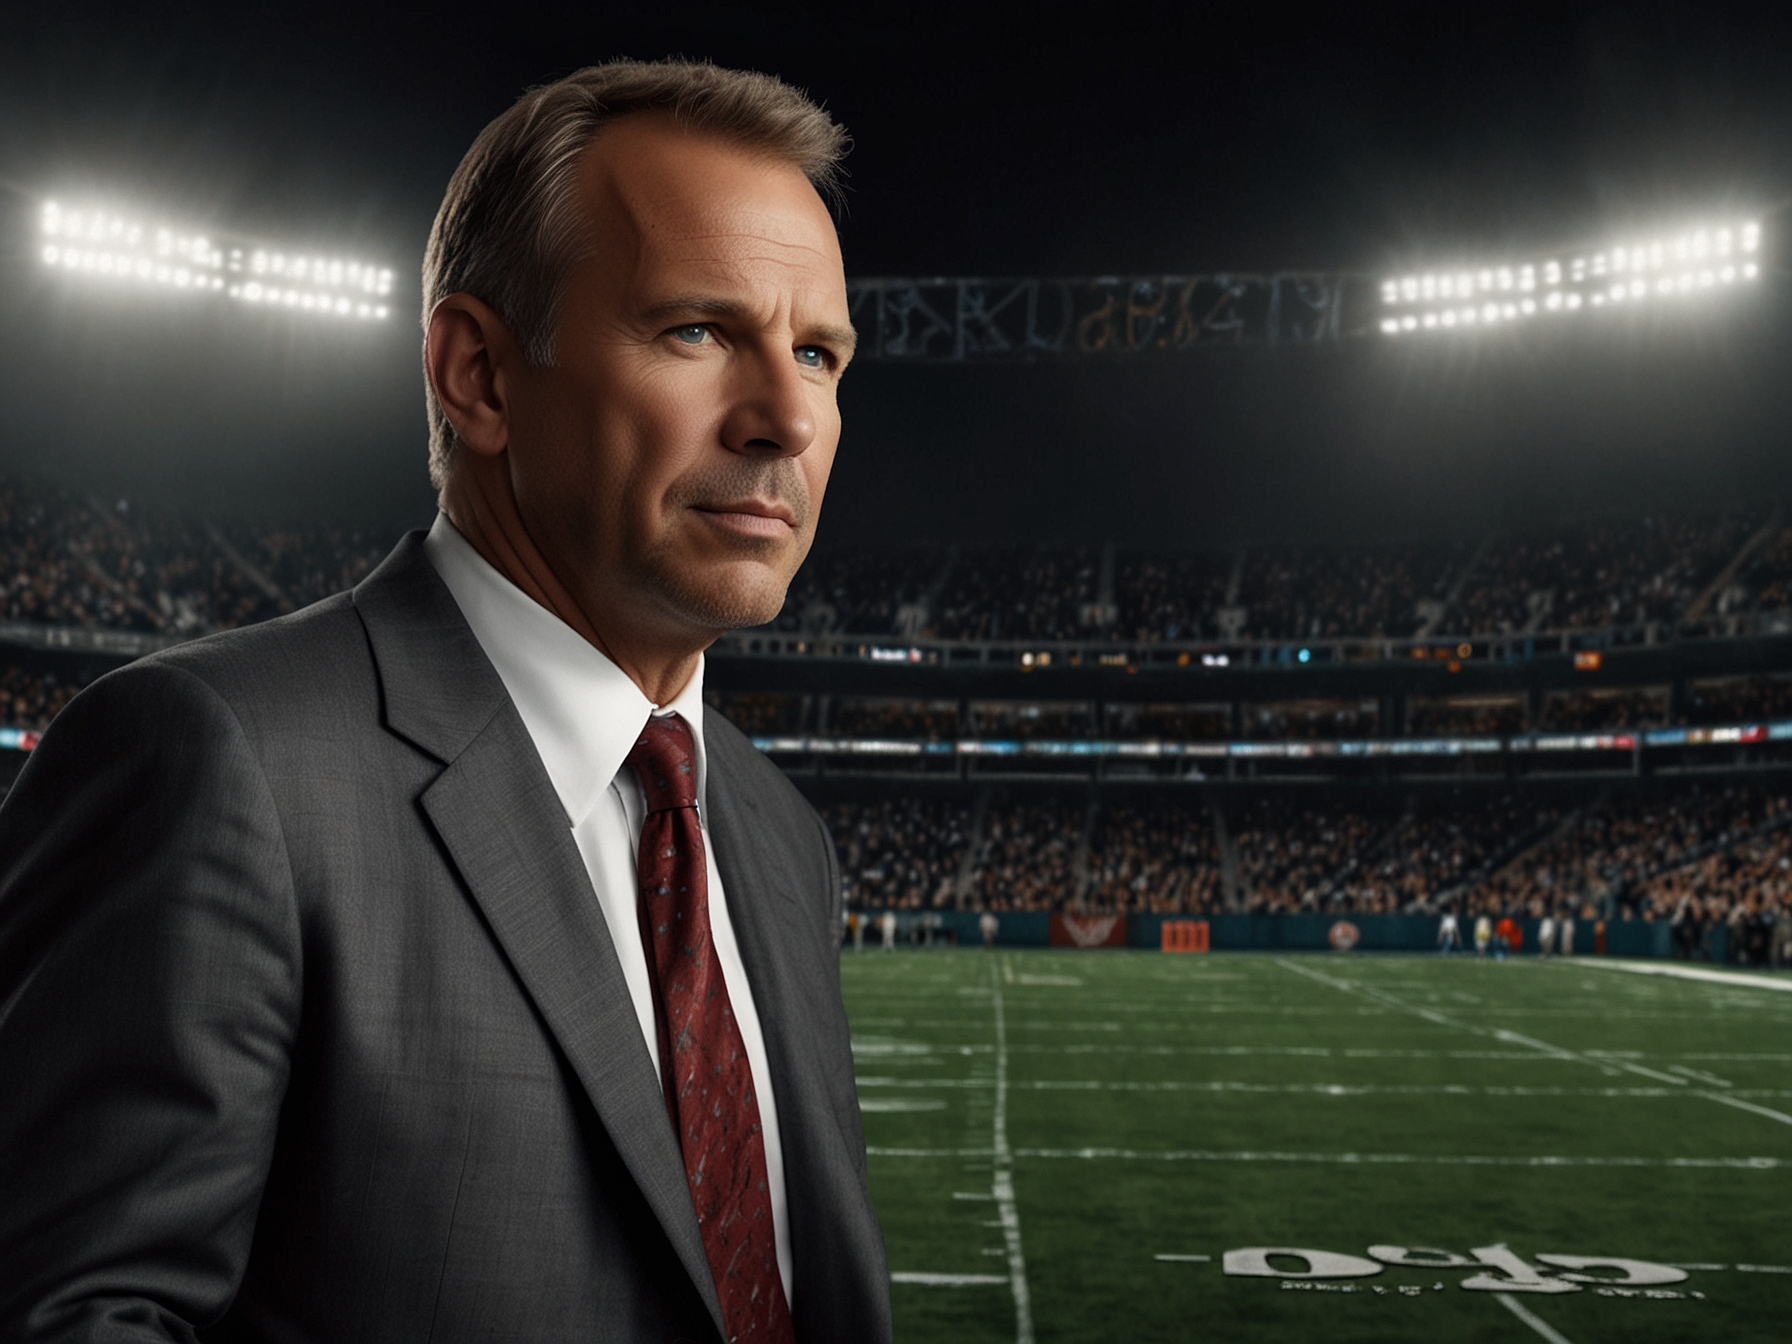 The movie poster of Draft Day featuring Kevin Costner as Sonny Weaver, against a backdrop of a football field, highlighting its focus on professional football and the high-stakes environment of the NFL Draft.